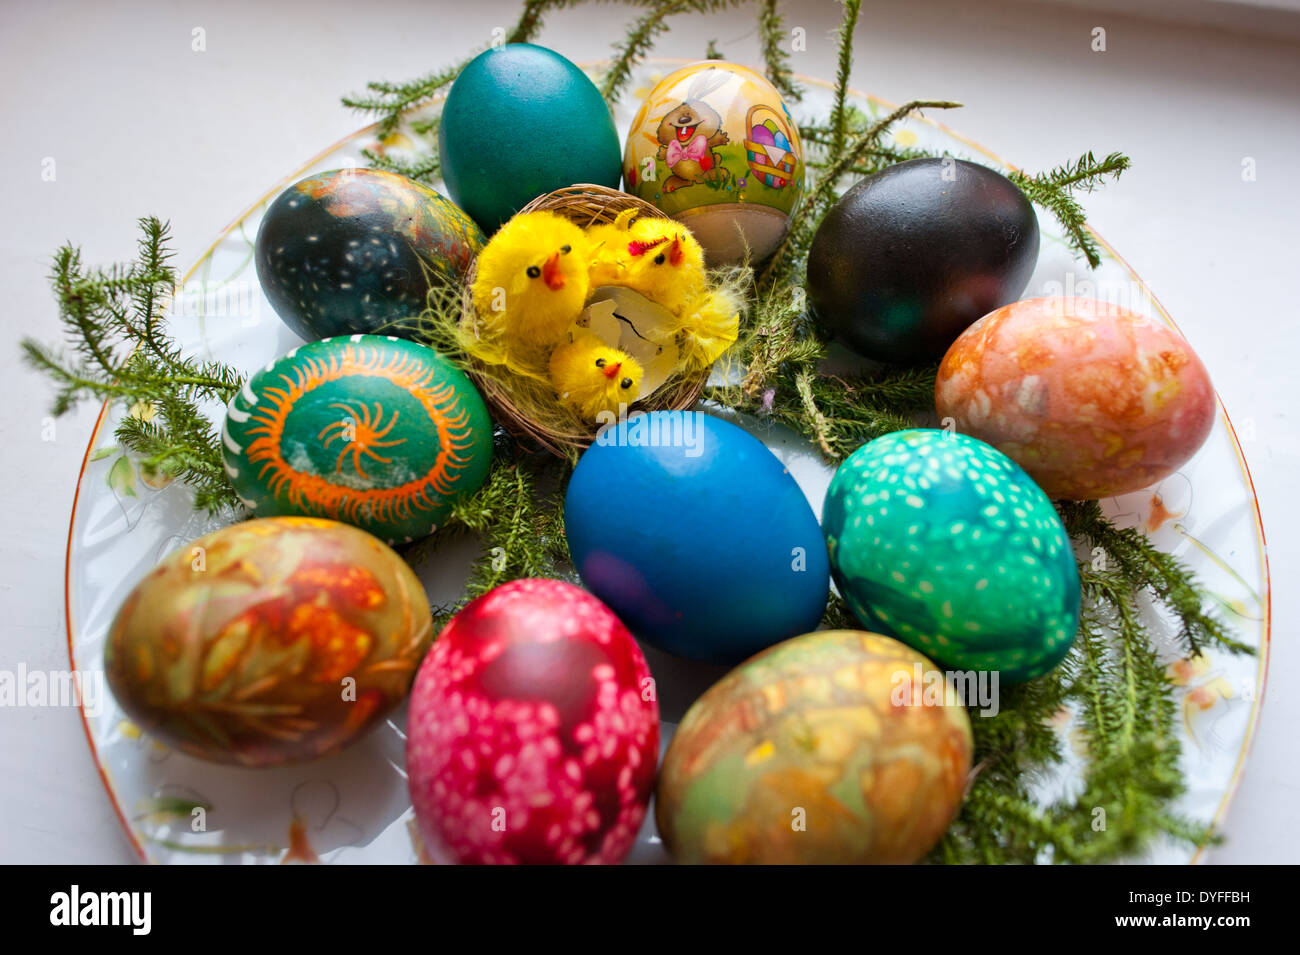 Traditional Easter eggs or Paschal eggs, decorated by boiling in dye, with onion skins and linseed. Stock Photo